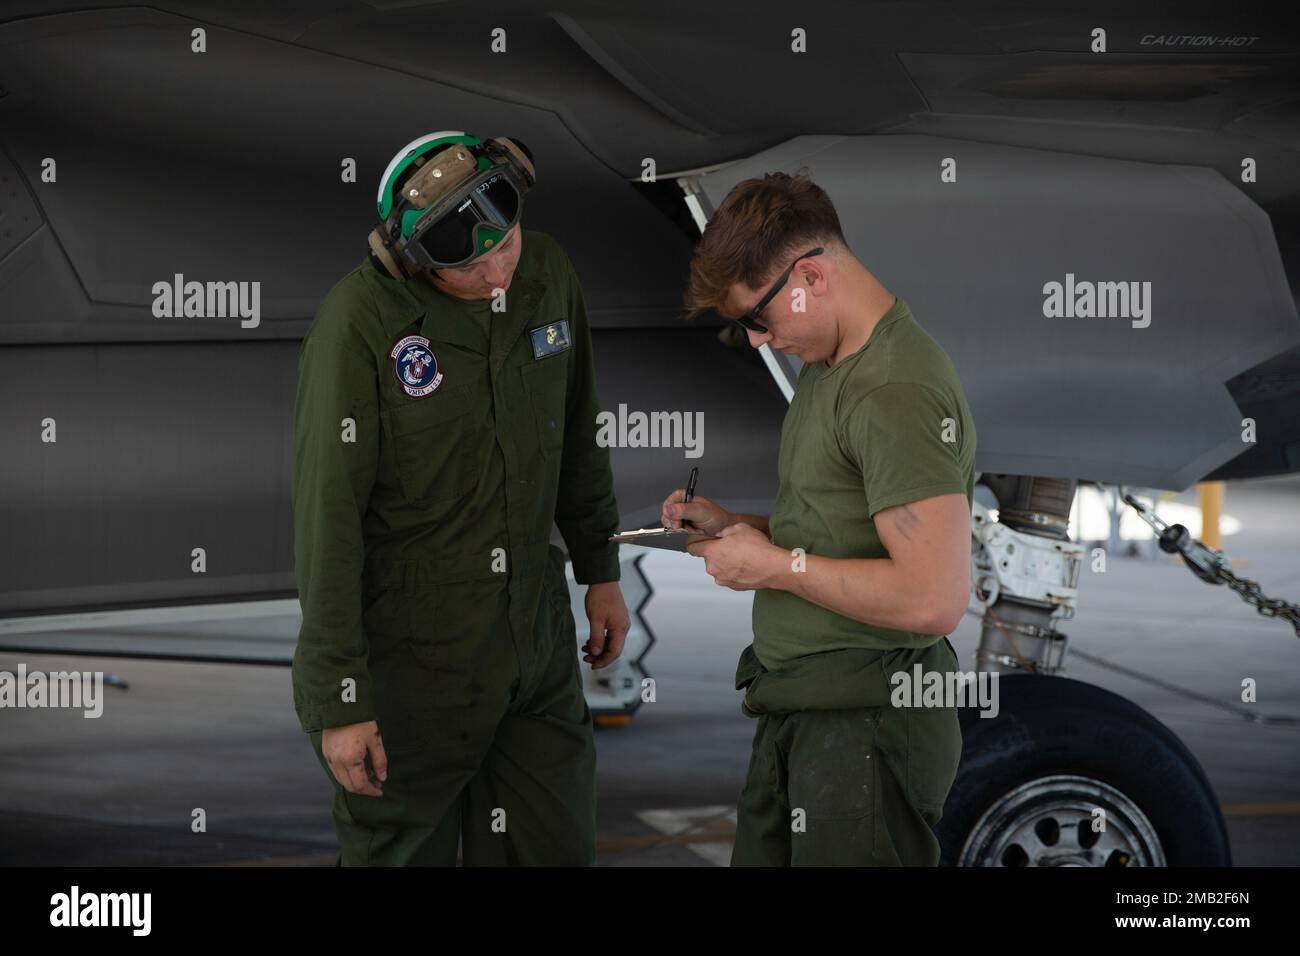 U.S. Marine Corps Lance Cpl. Logan Runnells, left, and Cpl. Jaden Johnson, both fixed-wing aircraft mechanics with Marine Fighter Attack Squadron (VMFA) 122, 13th Marine Expeditionary Unit, review a maintenance check list during Realistic Urban Training exercise at Marine Corps Air Station Yuma, Arizona, June 9, 2022. The purpose of RUT is to enhance the integration and collective capability of the MEU's command, air, ground, and logistics elements and prepare the 13th MEU to meet the nation's crisis response needs during its upcoming overseas deployment. Stock Photo